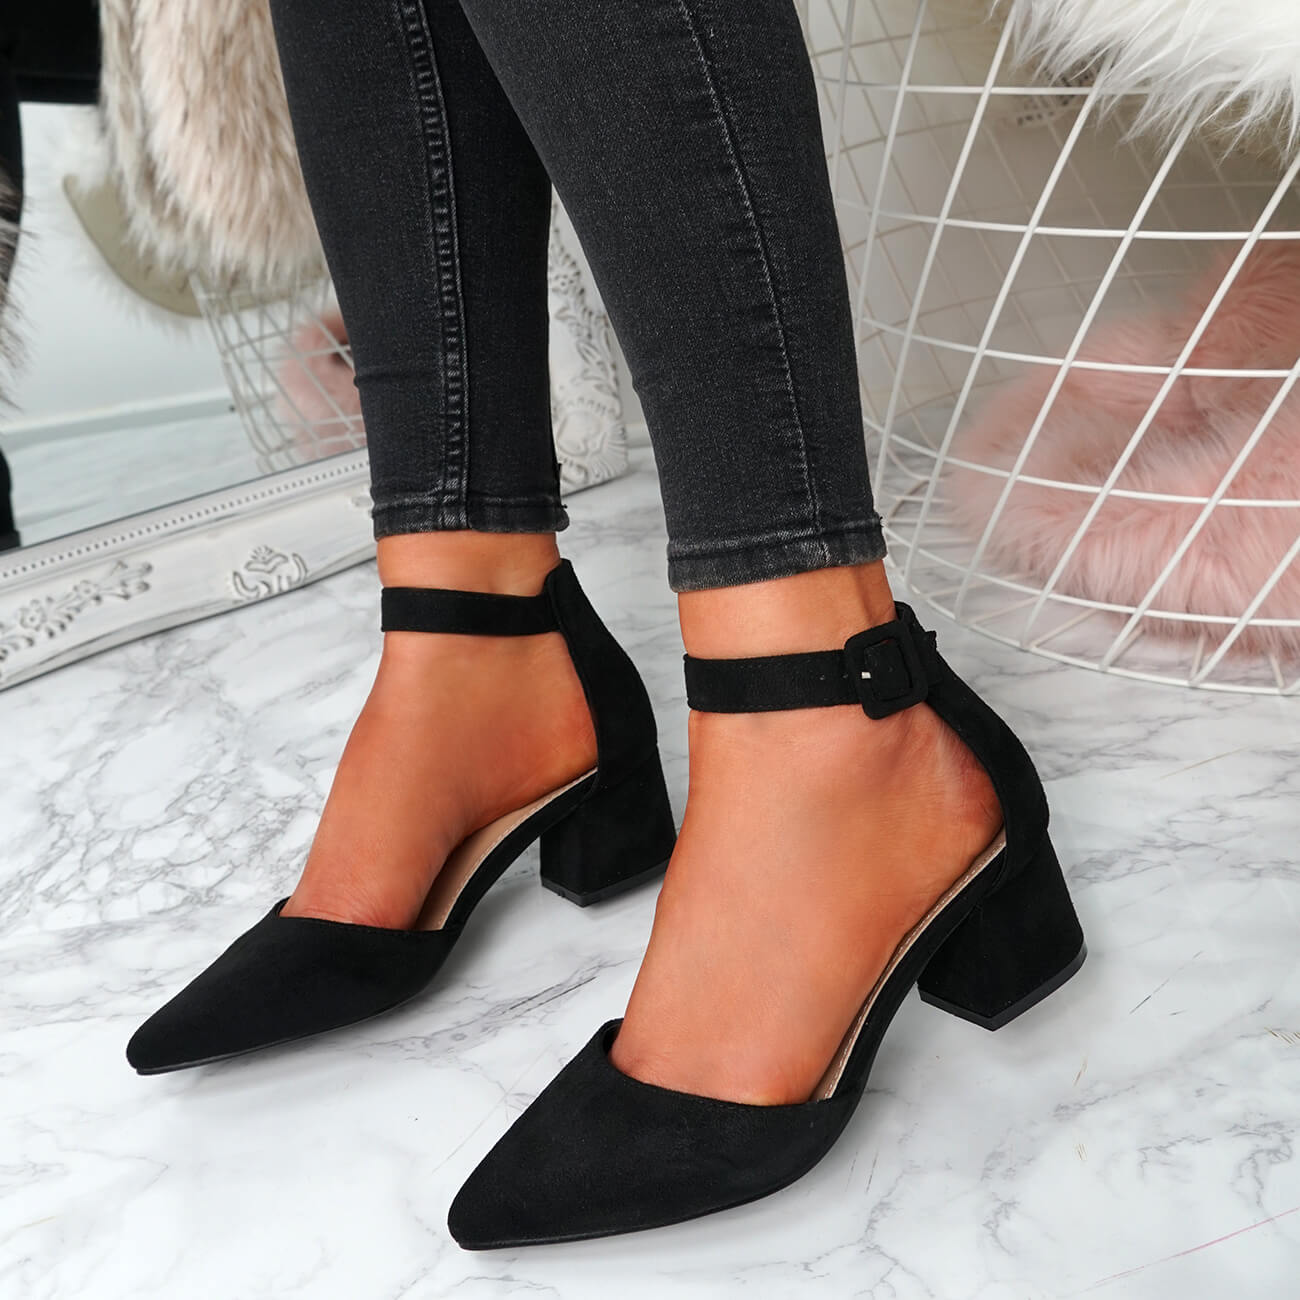 WOMENS LADIES ANKLE STRAP POINTED TOE HEEL PUMPS BLOCK HEELS SHOES SIZE